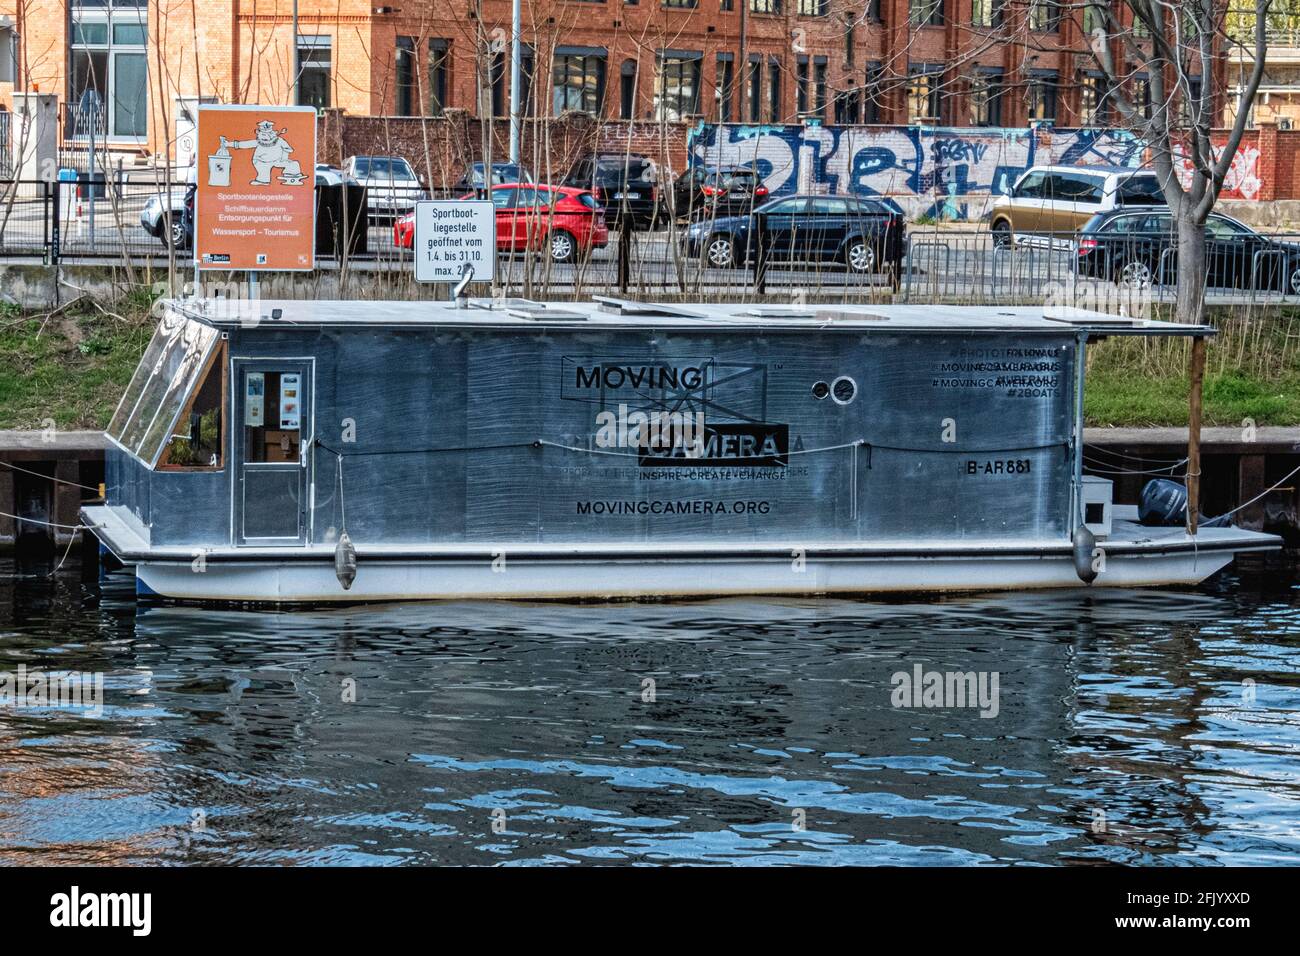 Moving Camera on Spree River,Mitte, Berlin The houseboat is a floating Camera Obscura and Polish Artist Maciej Markowicz takes pictures from the water Stock Photo